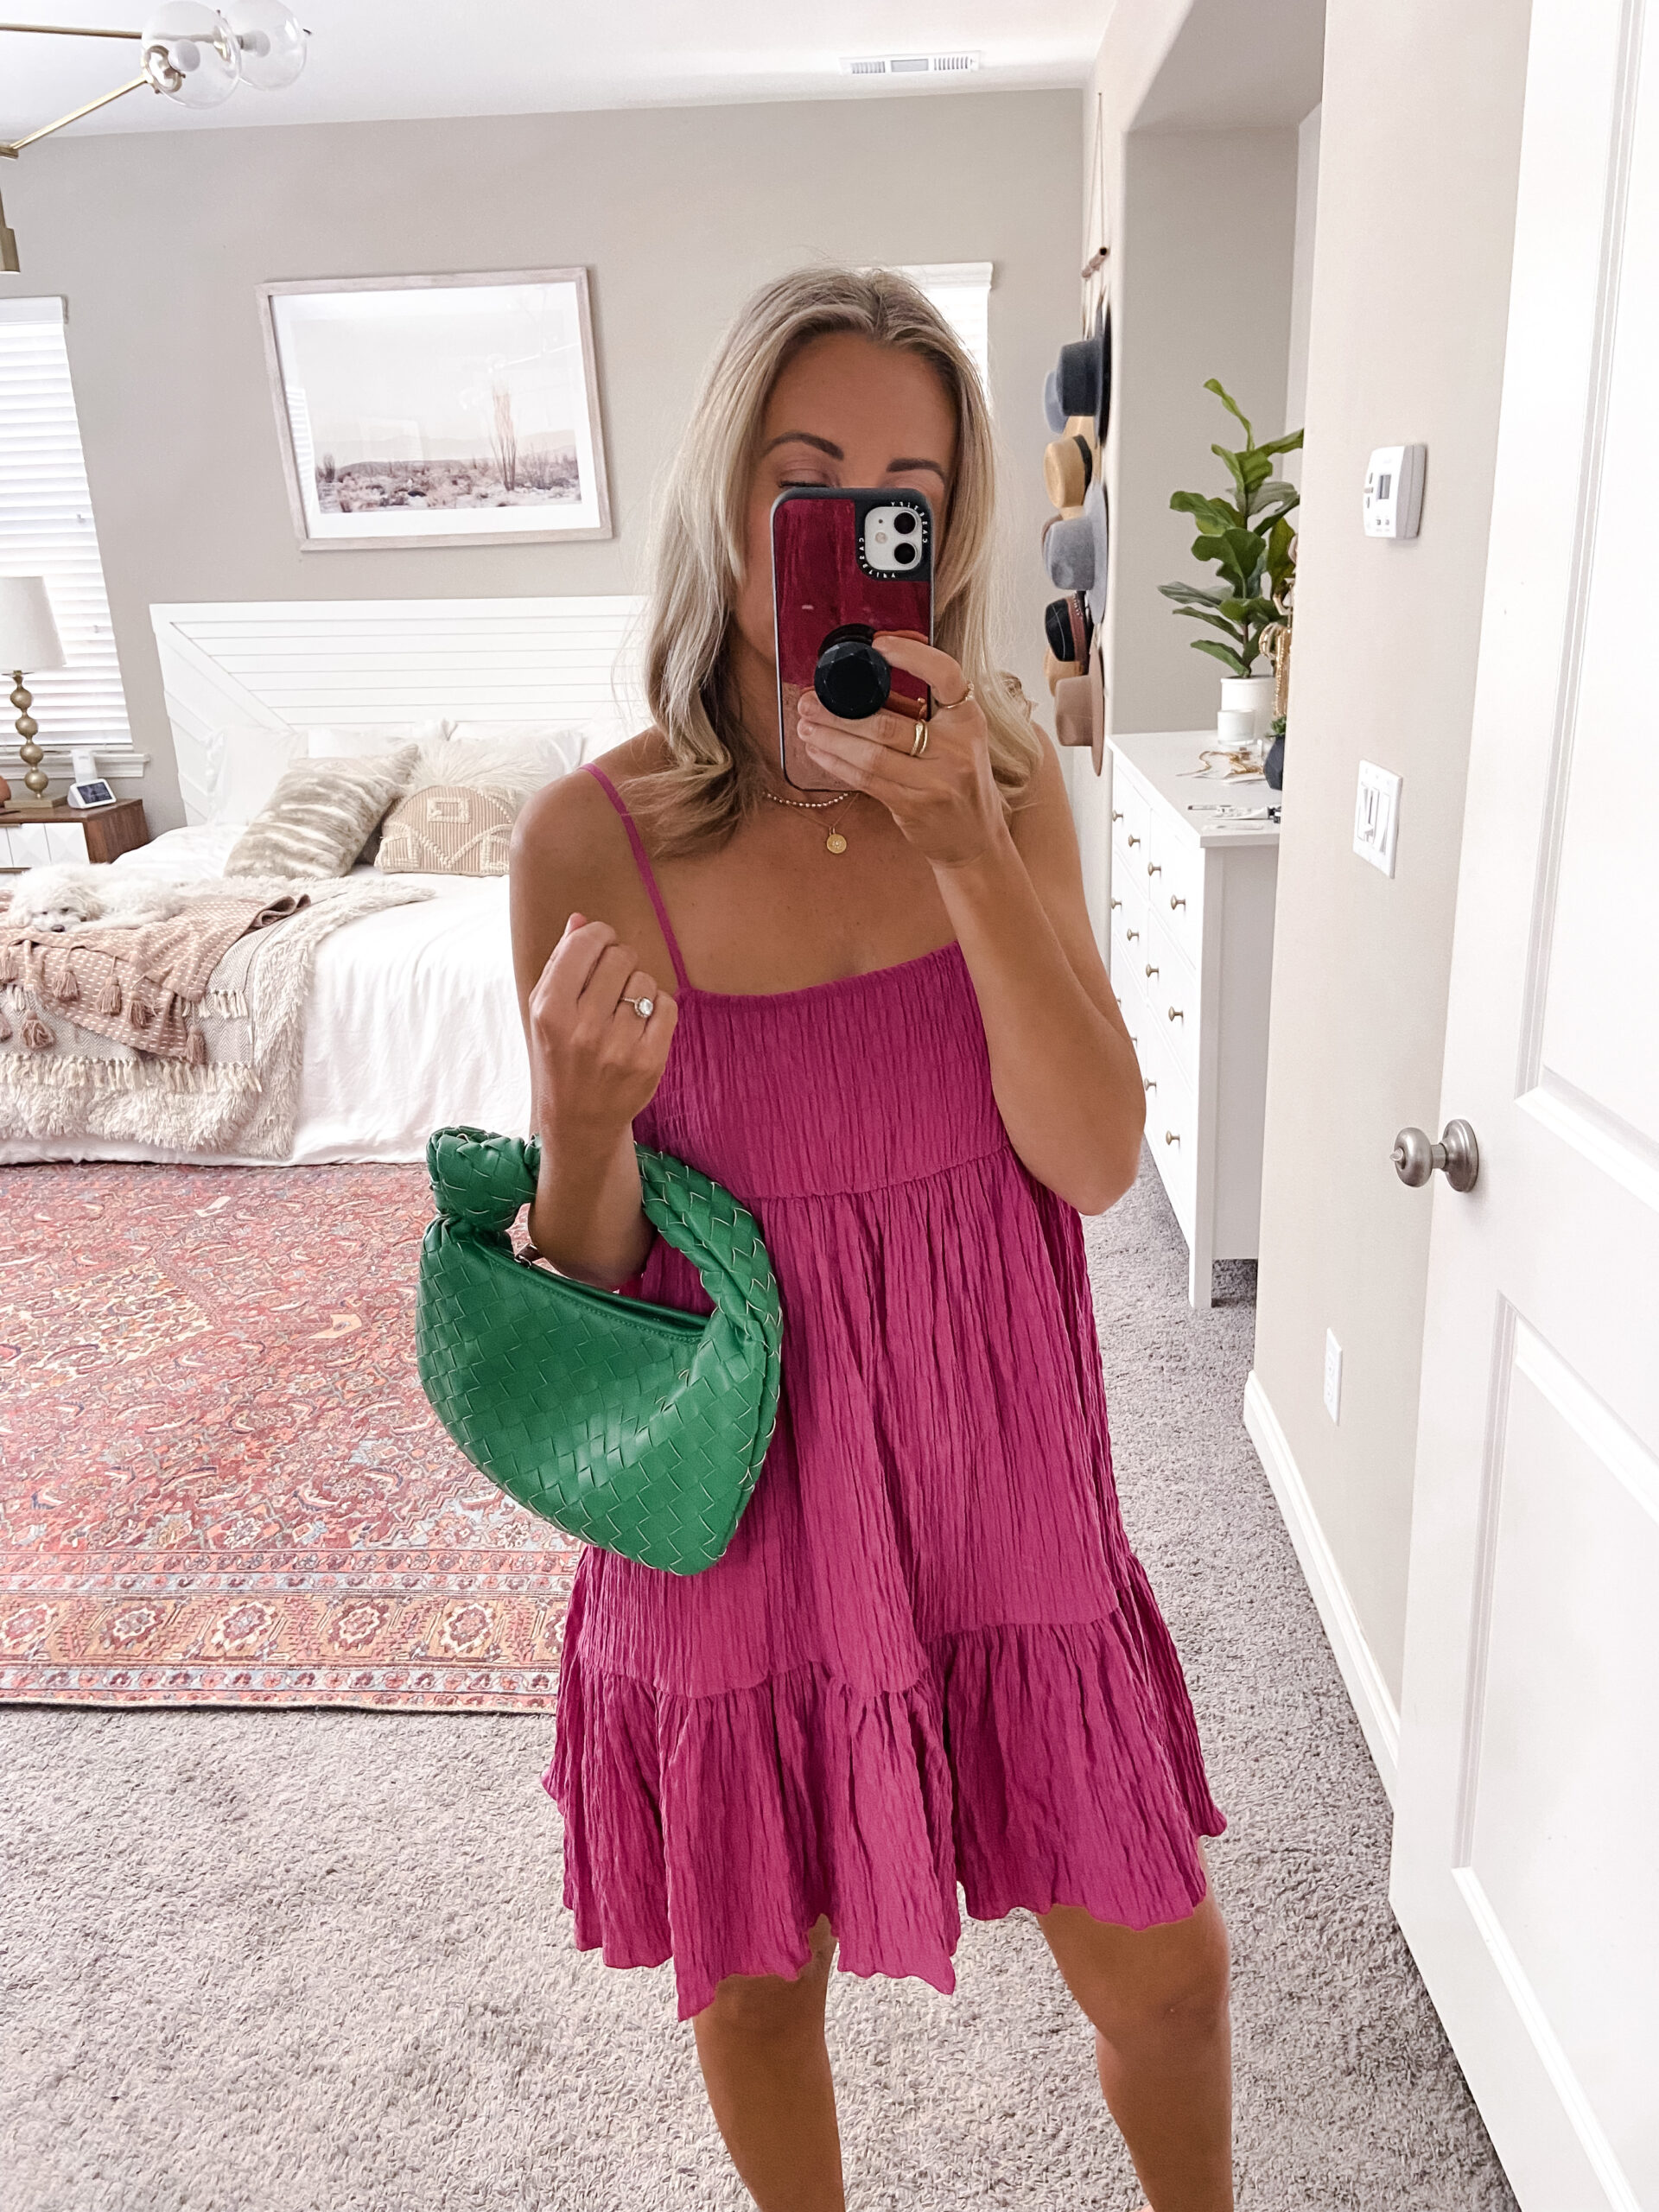 THE COLOR TREND FOR SUMMER- Jaclyn De Leon. This season is all about fun bold colors. From pink to green and every color in between. Start off wearing bold colors with a handbag or statement earrings. If you are feeling bold a pink top or green pants is perfect for summer!